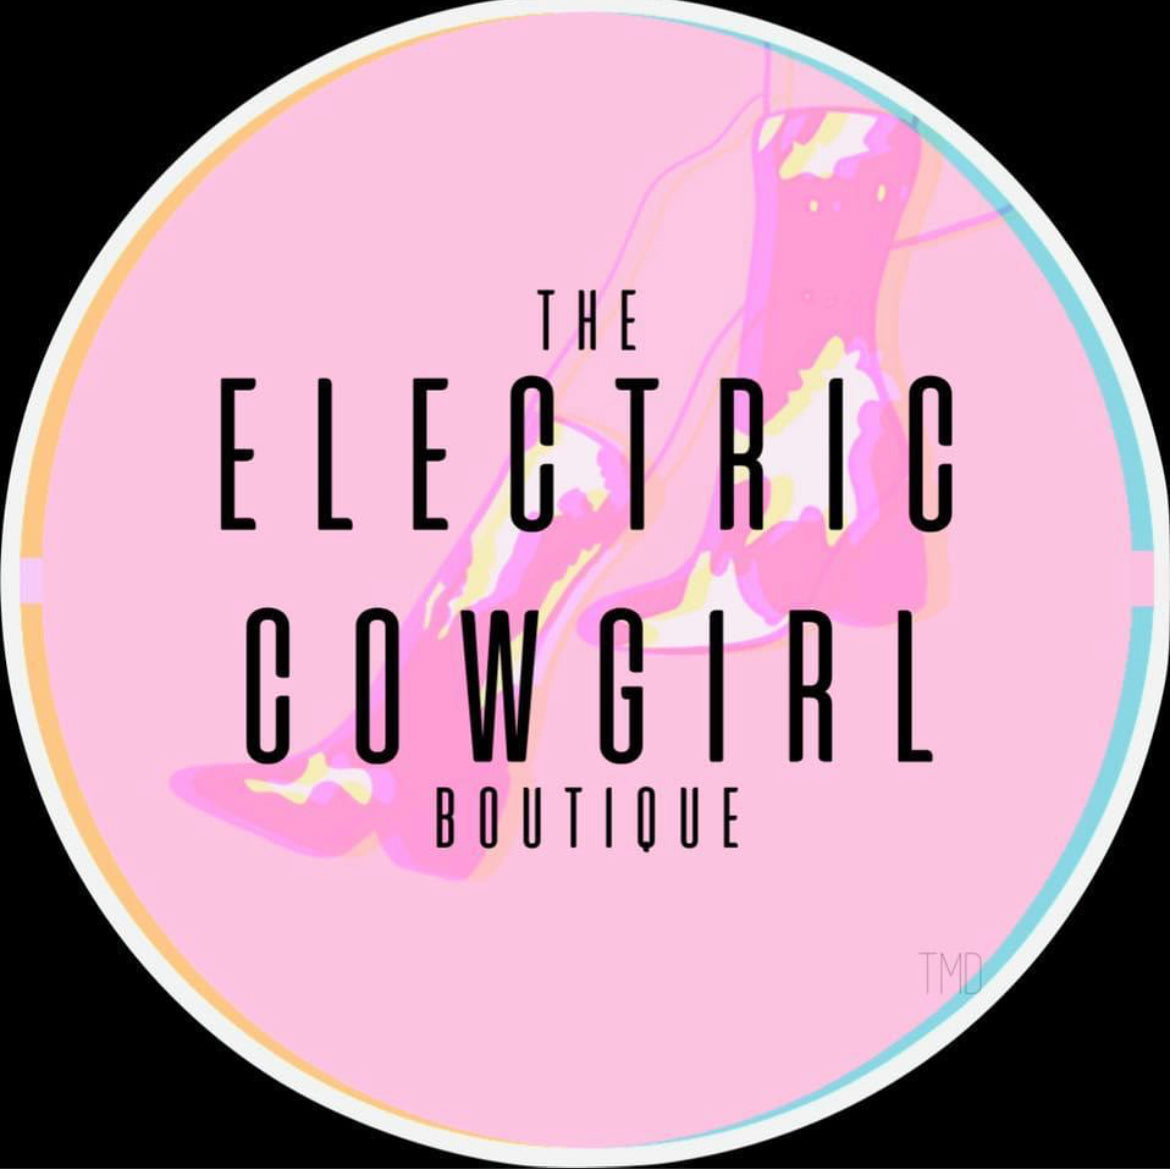 The Electric Cowgirl Boutique Gift Card